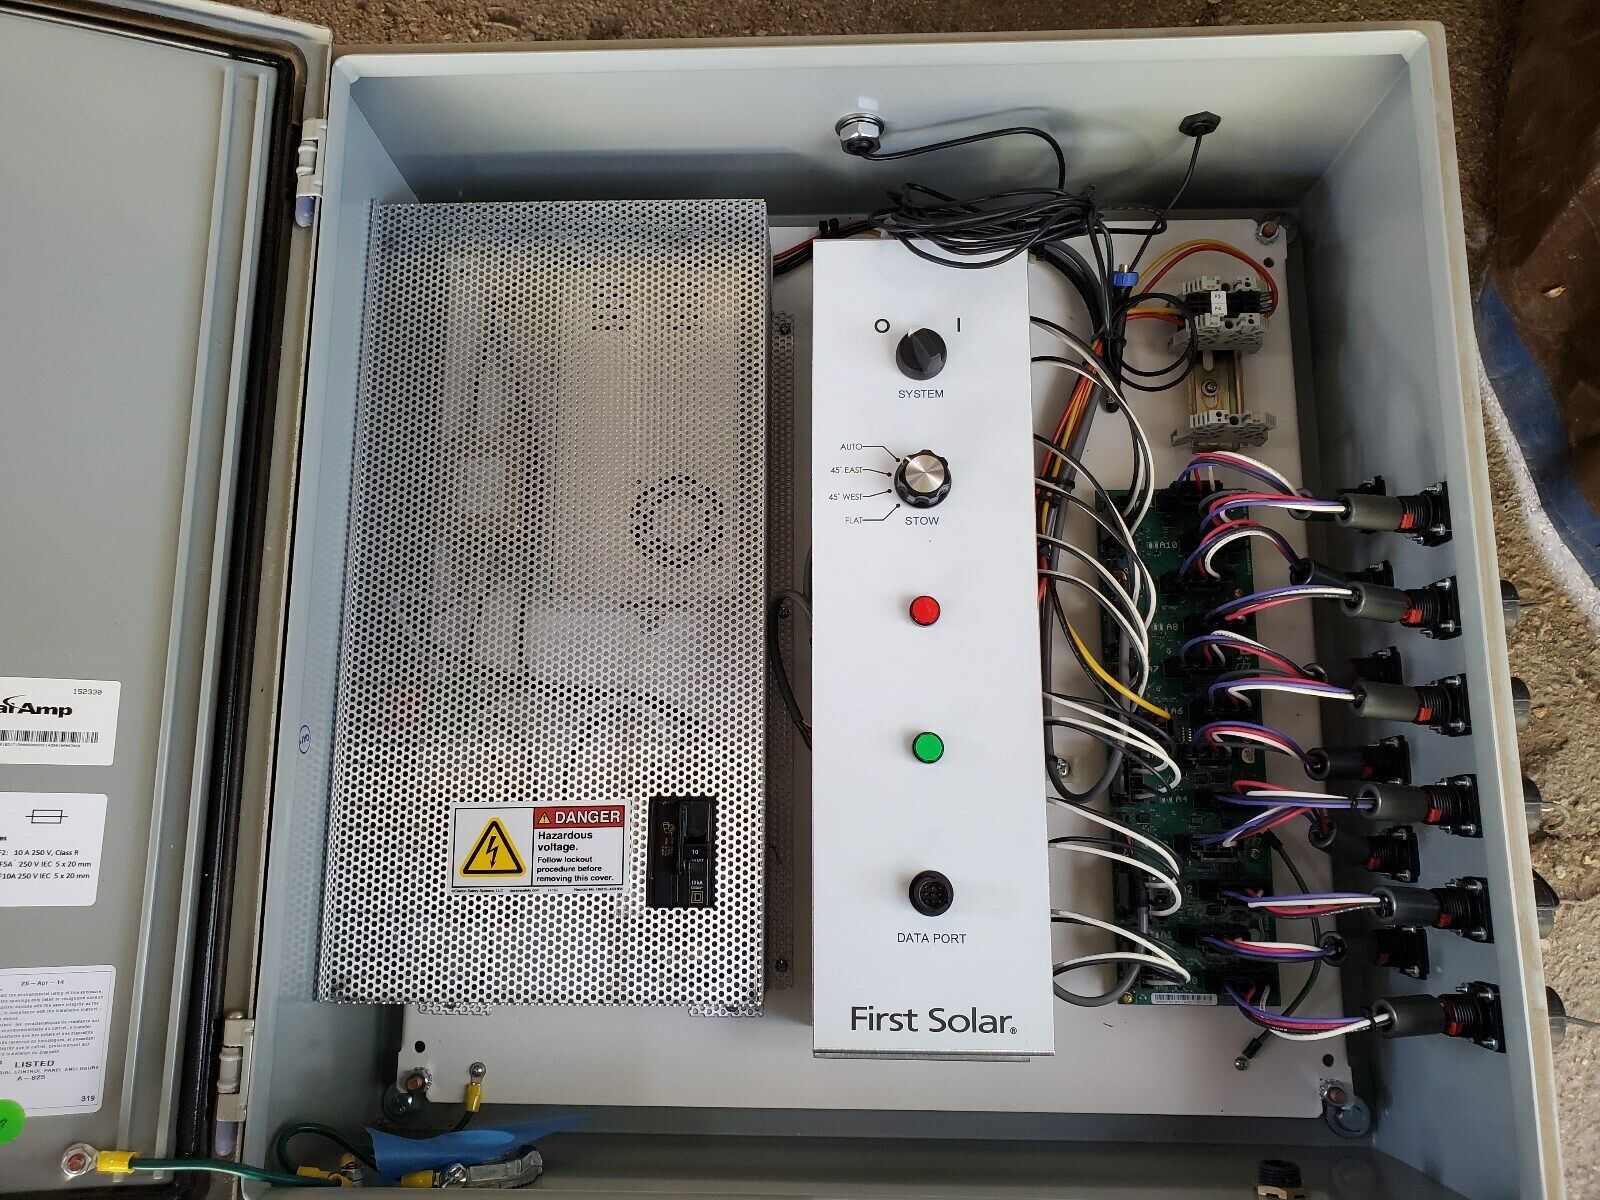 First Solar FSTC401 Control Panel *incomplete* missing data port